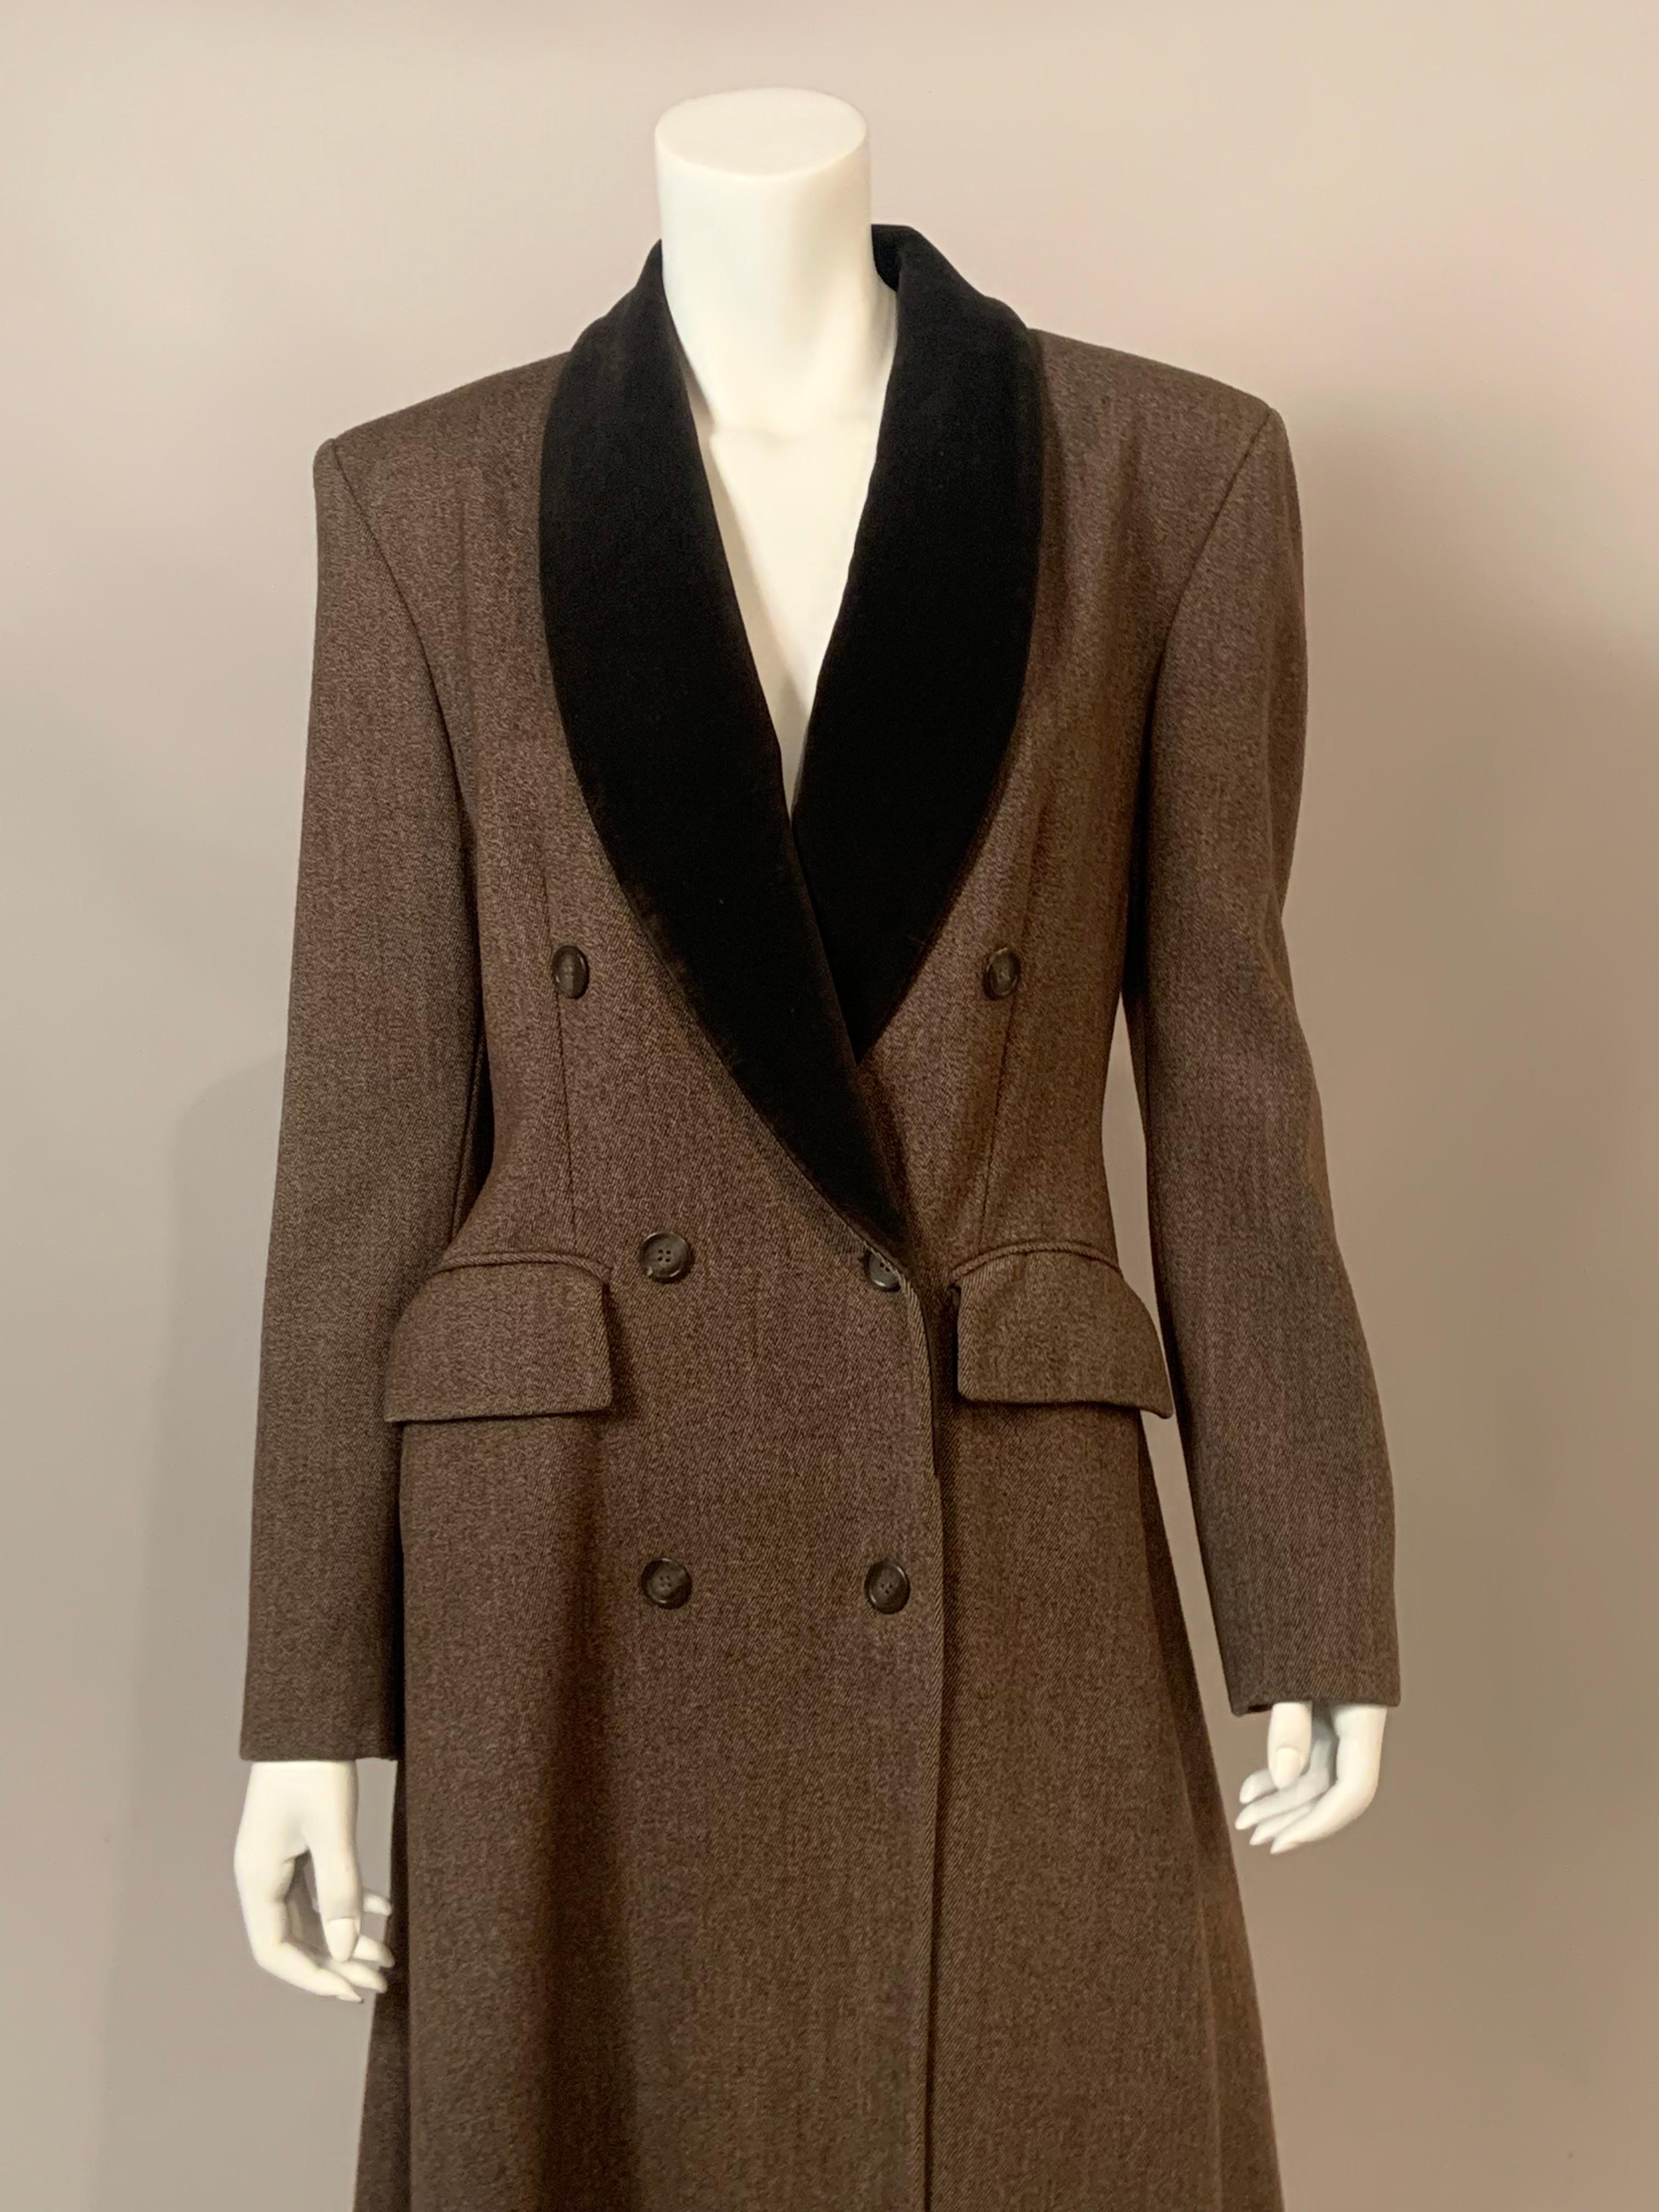 This classic light brown wool coat from Jaeger, London is a maxi coat with a wonderful movement.  The coat has a brown velvet collar, six buttons at the center front and three on the cuffs, two patch pockets and it is fully lined.  It is in